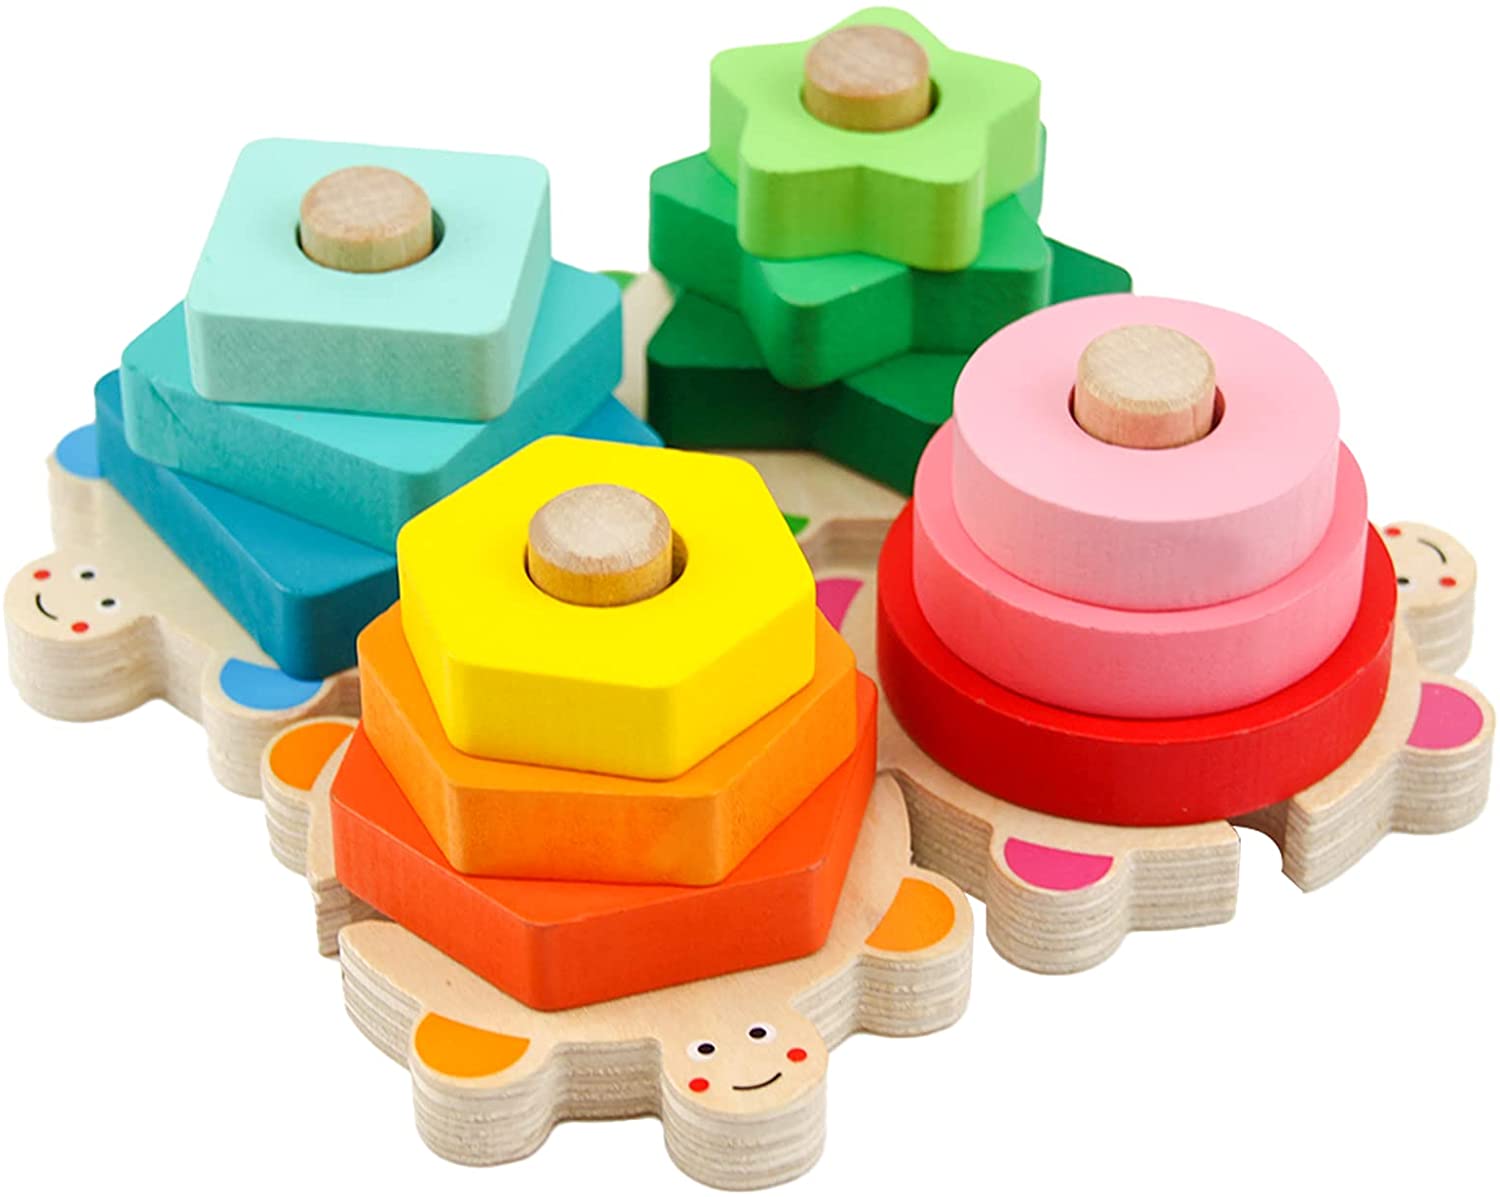 Montessori Shape Sorter Toys for Toddlers - WOOD CITY